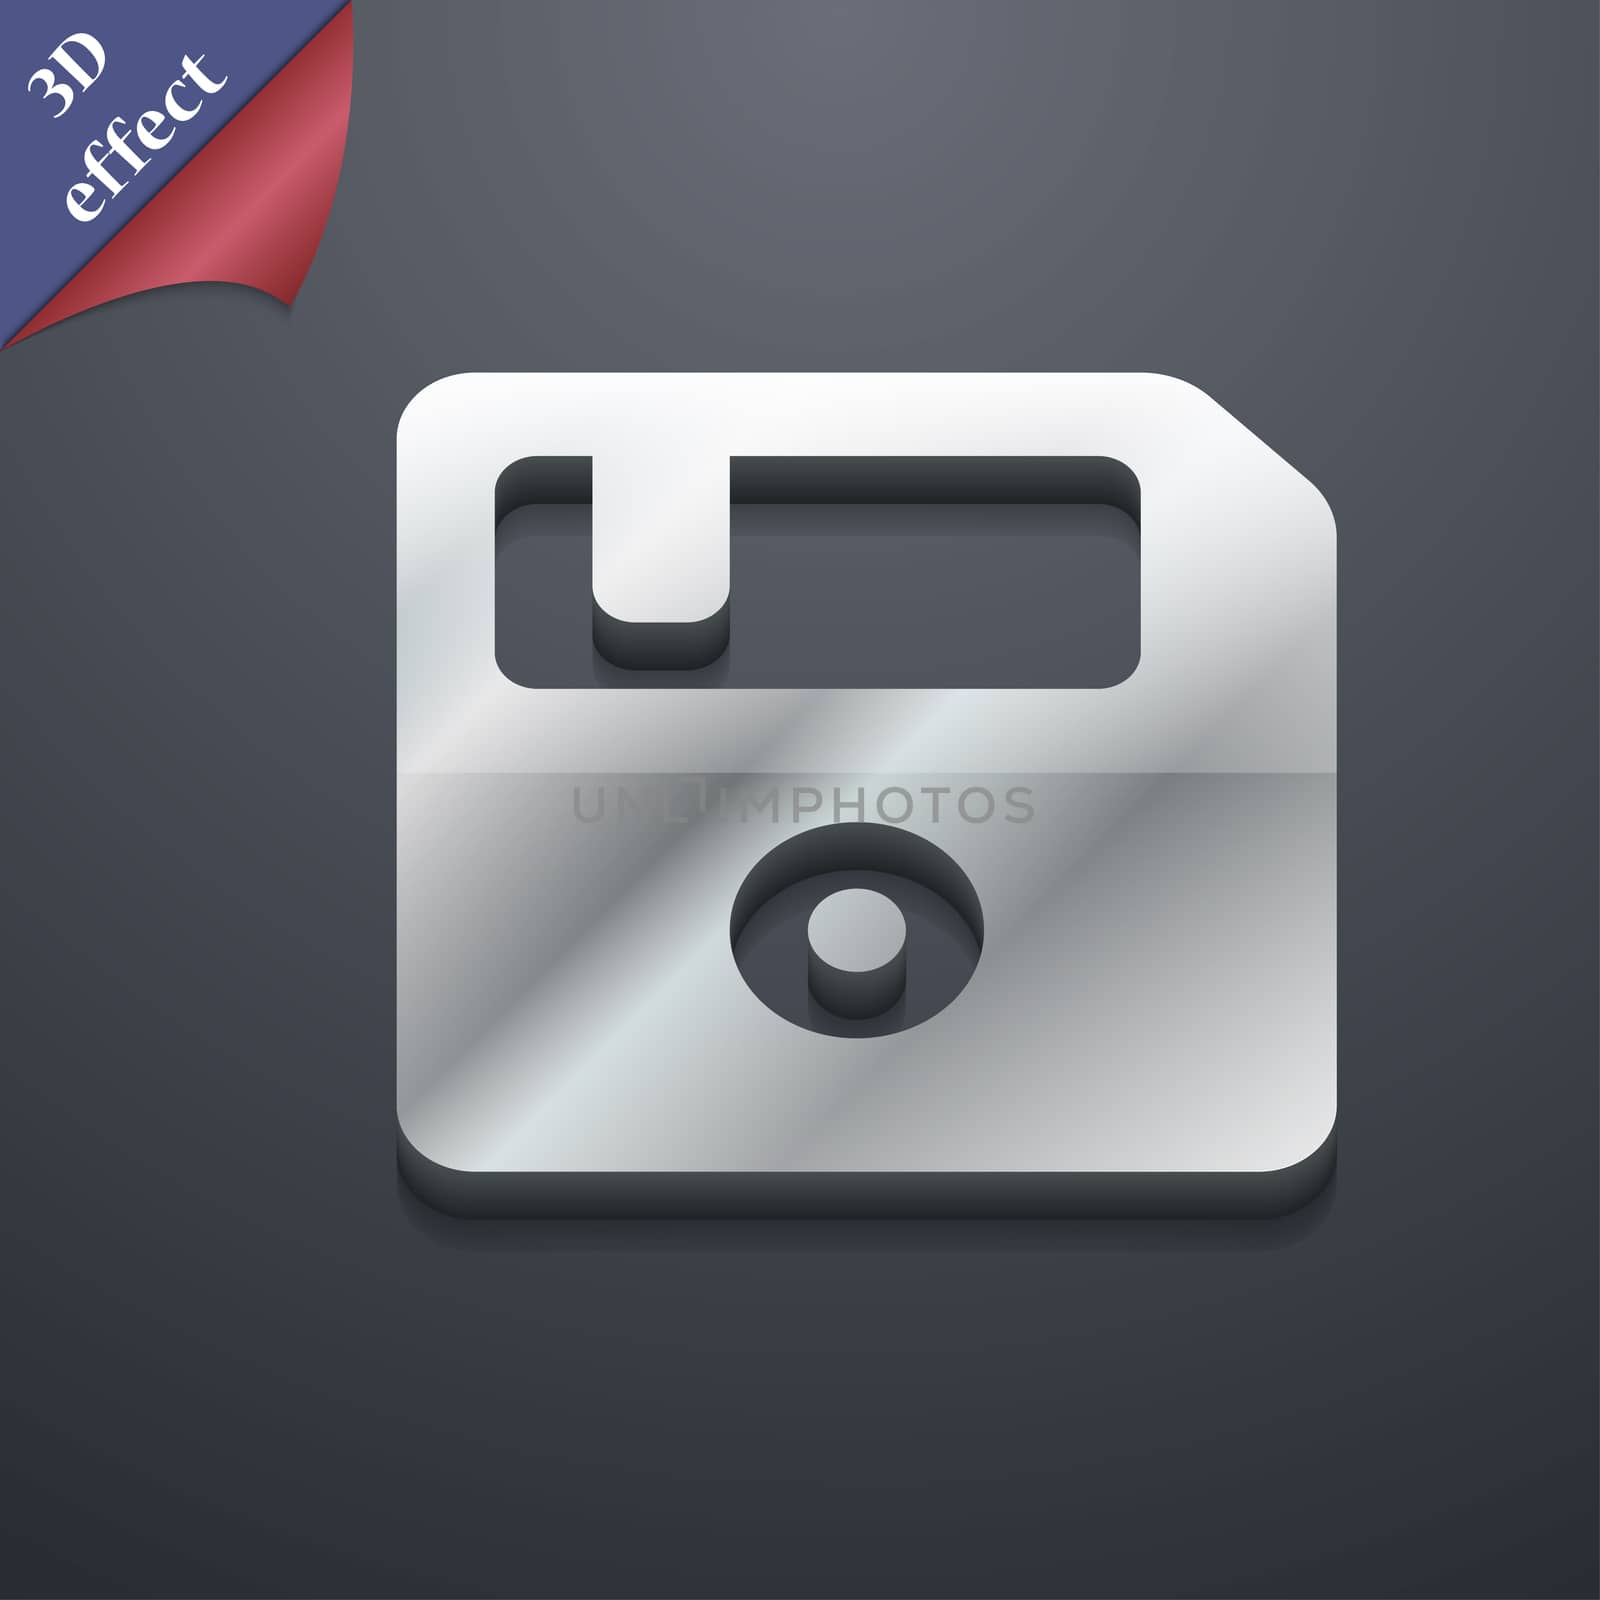 floppy icon symbol. 3D style. Trendy, modern design with space for your text illustration. Rastrized copy